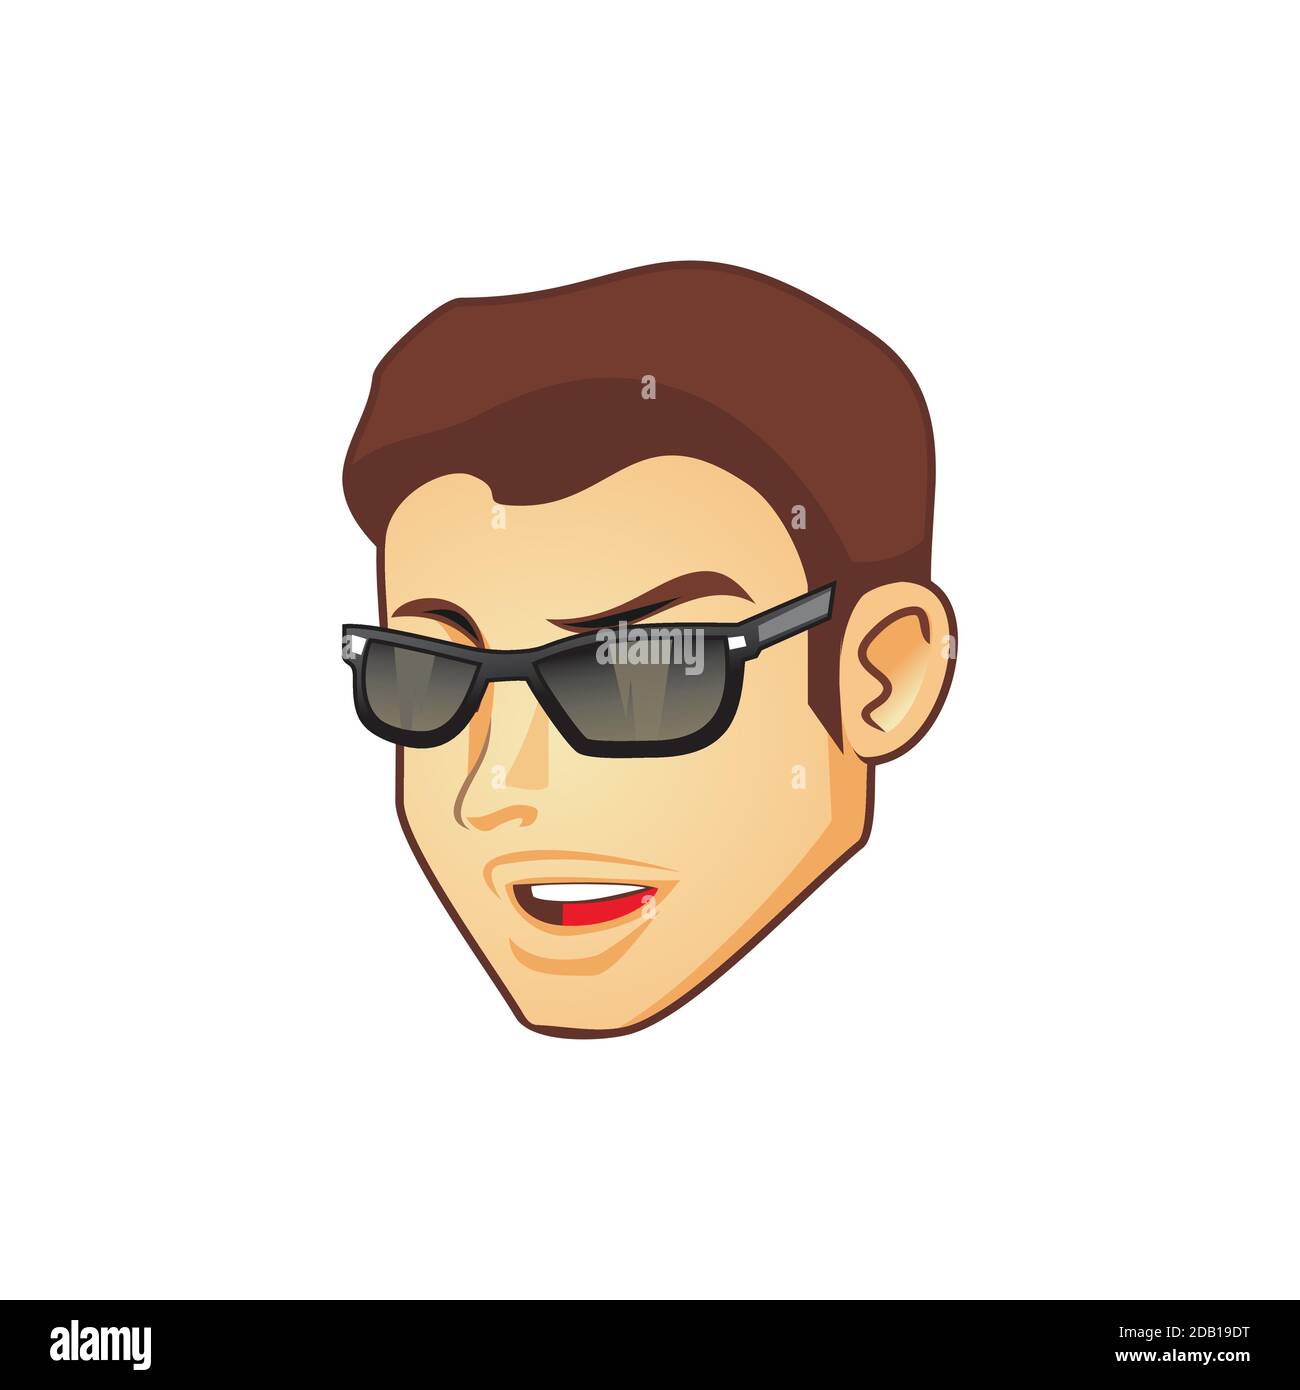 Cool guy head wearing sunglass design illustration vector eps format , suitable for your design needs, logo, illustration, animation, etc. Stock Vector